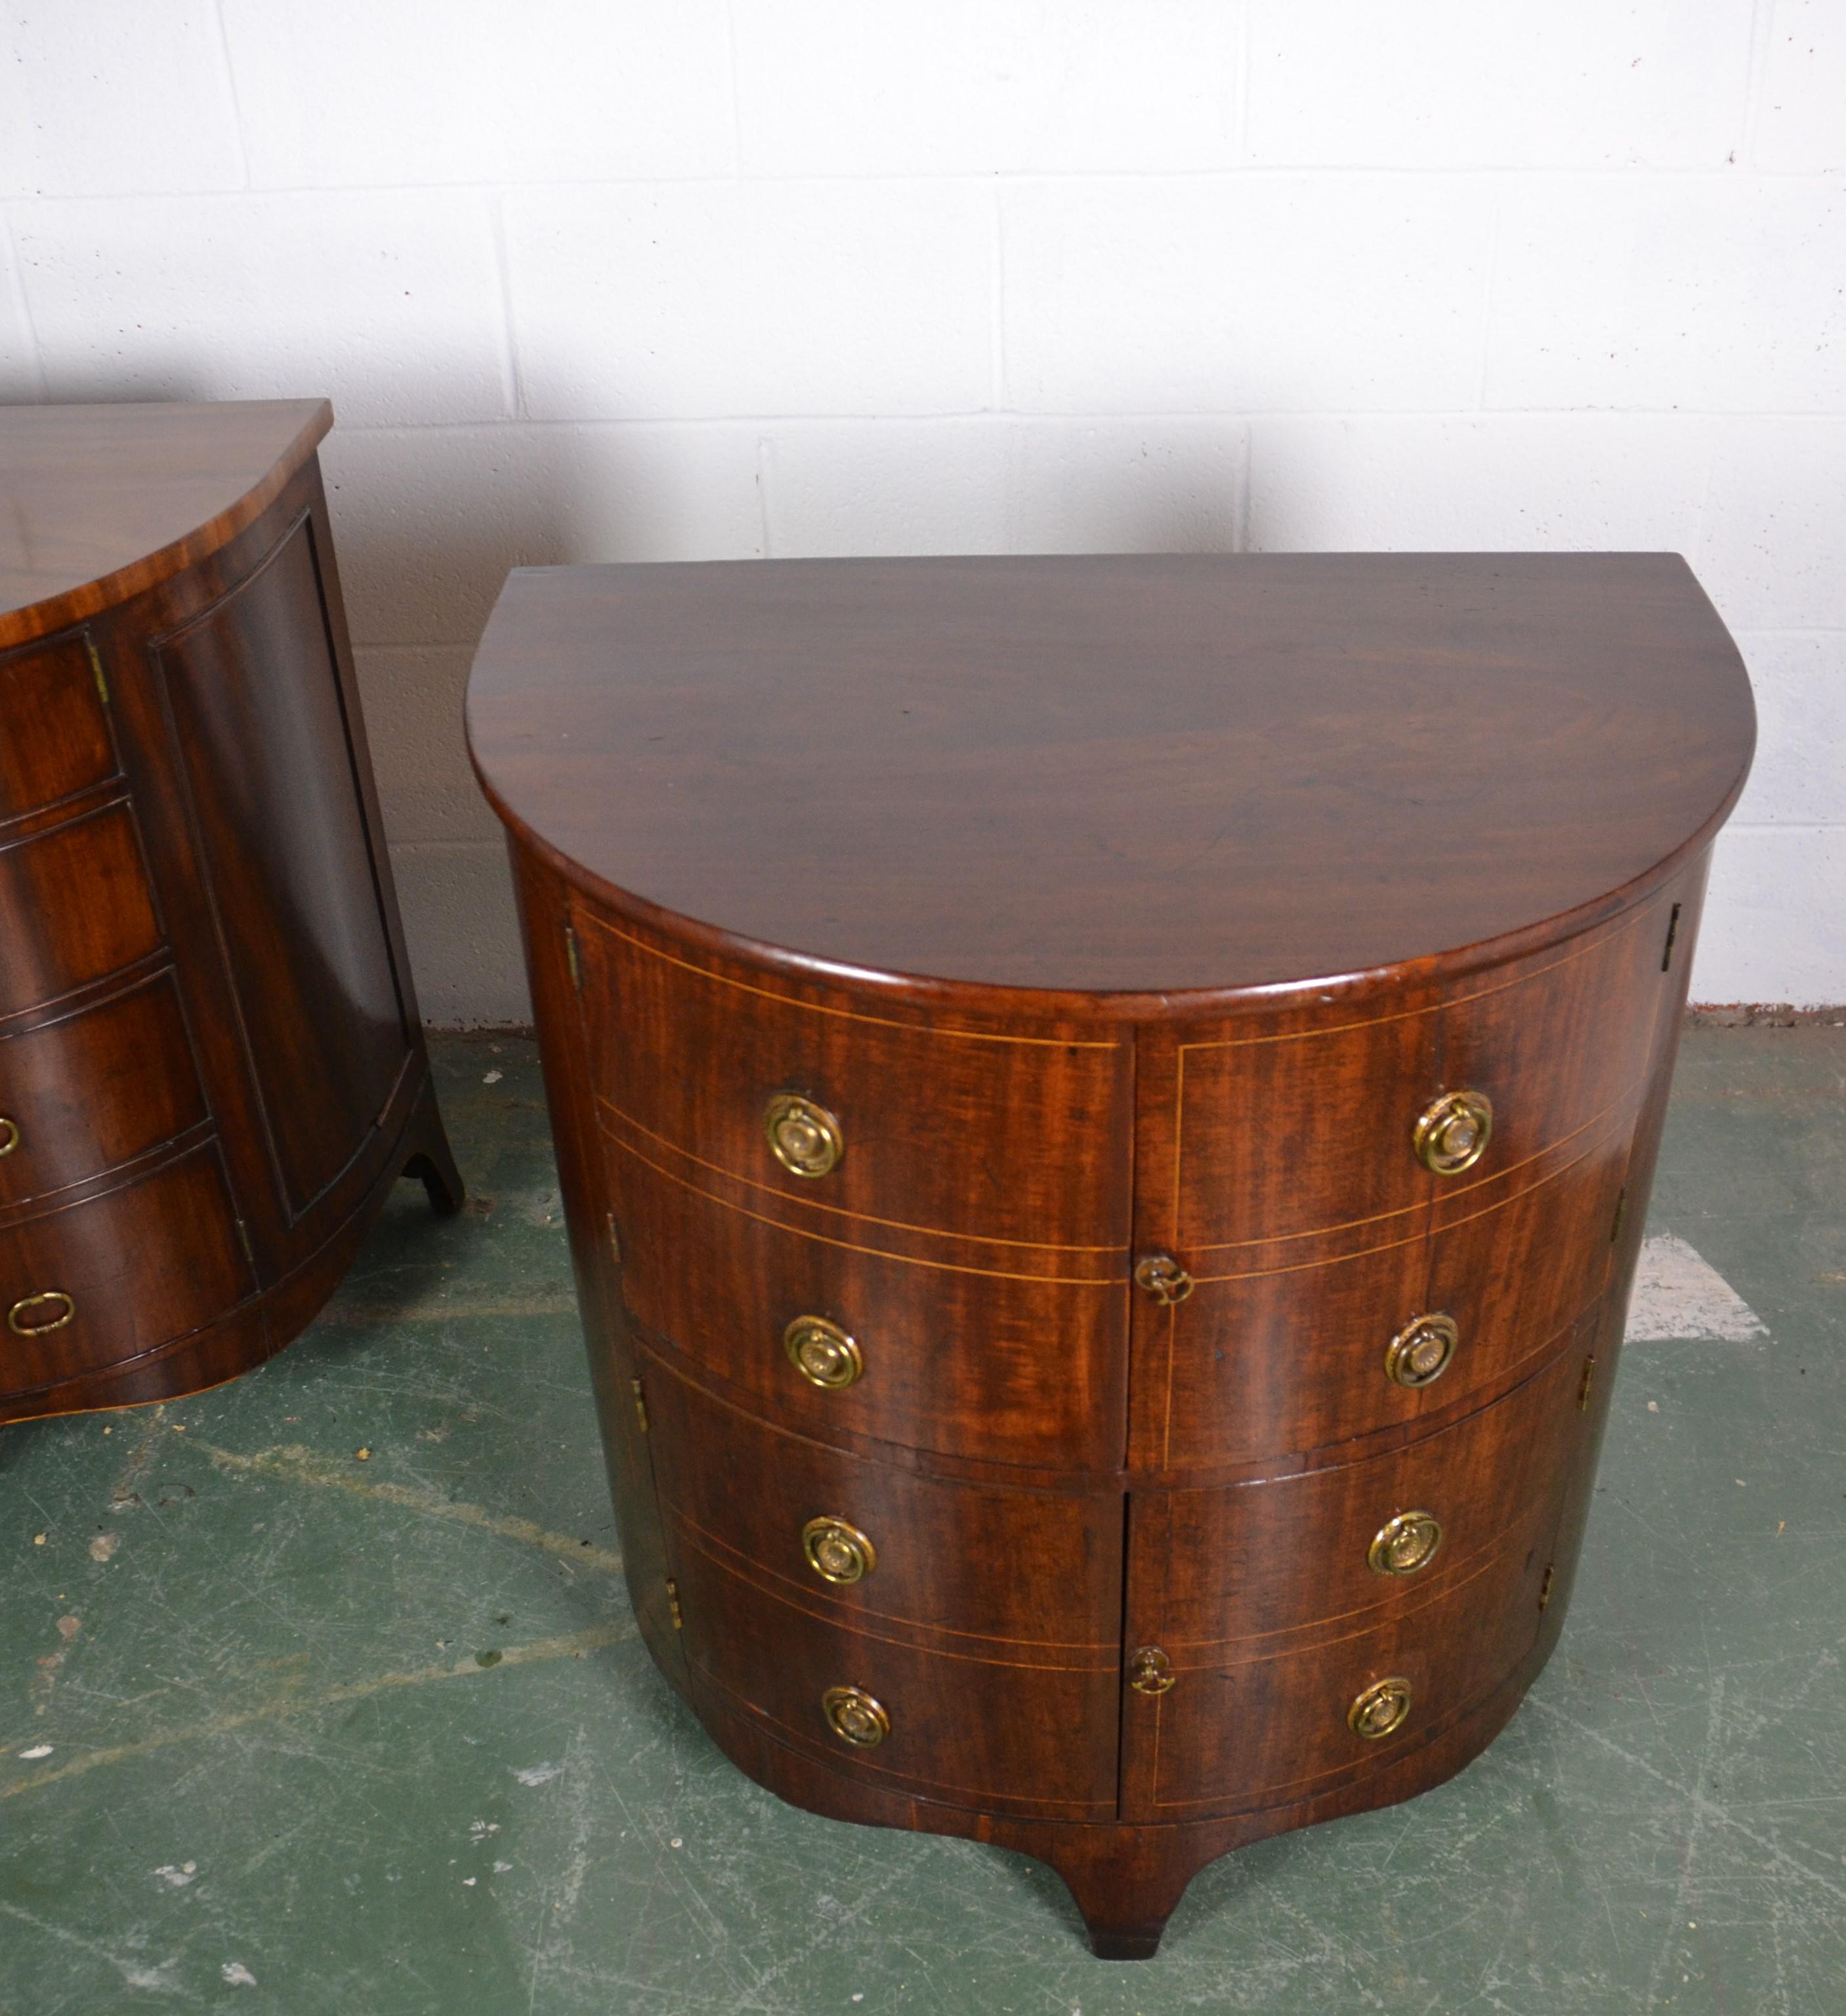 19th century English commode. One is slightly smaller and has different brass pulls. The smaller size 27